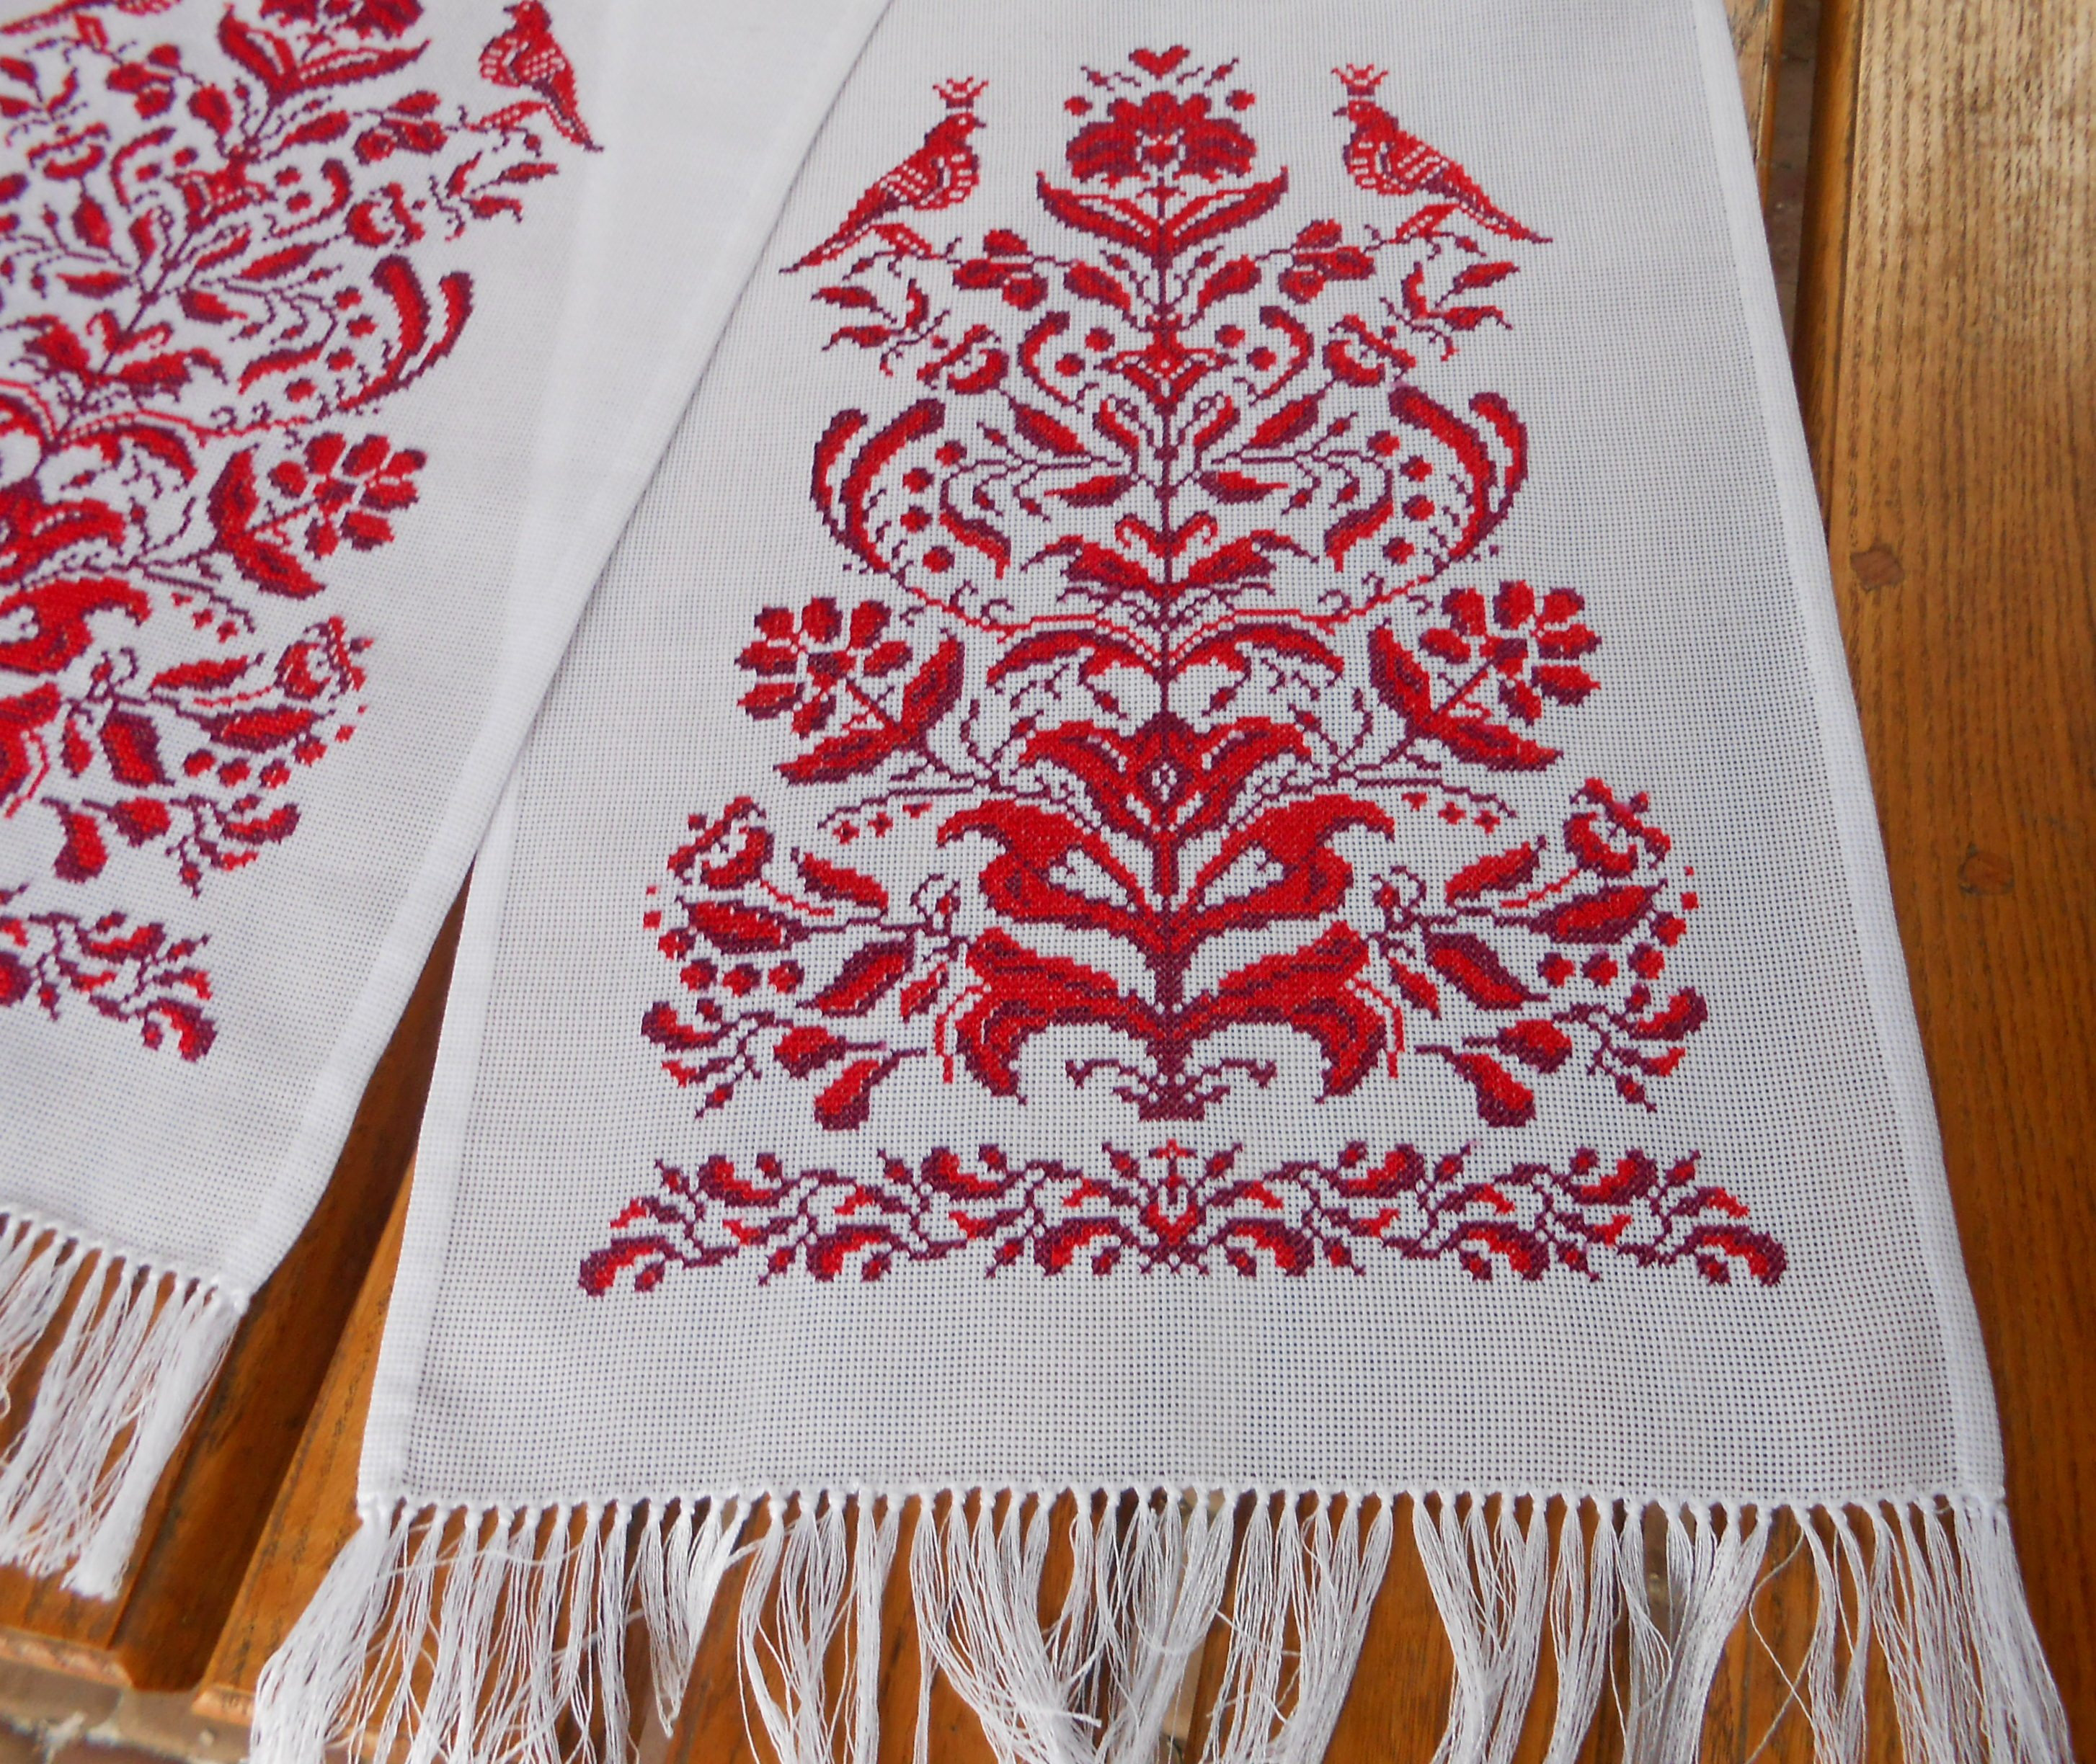 Wedding towels with embroidery